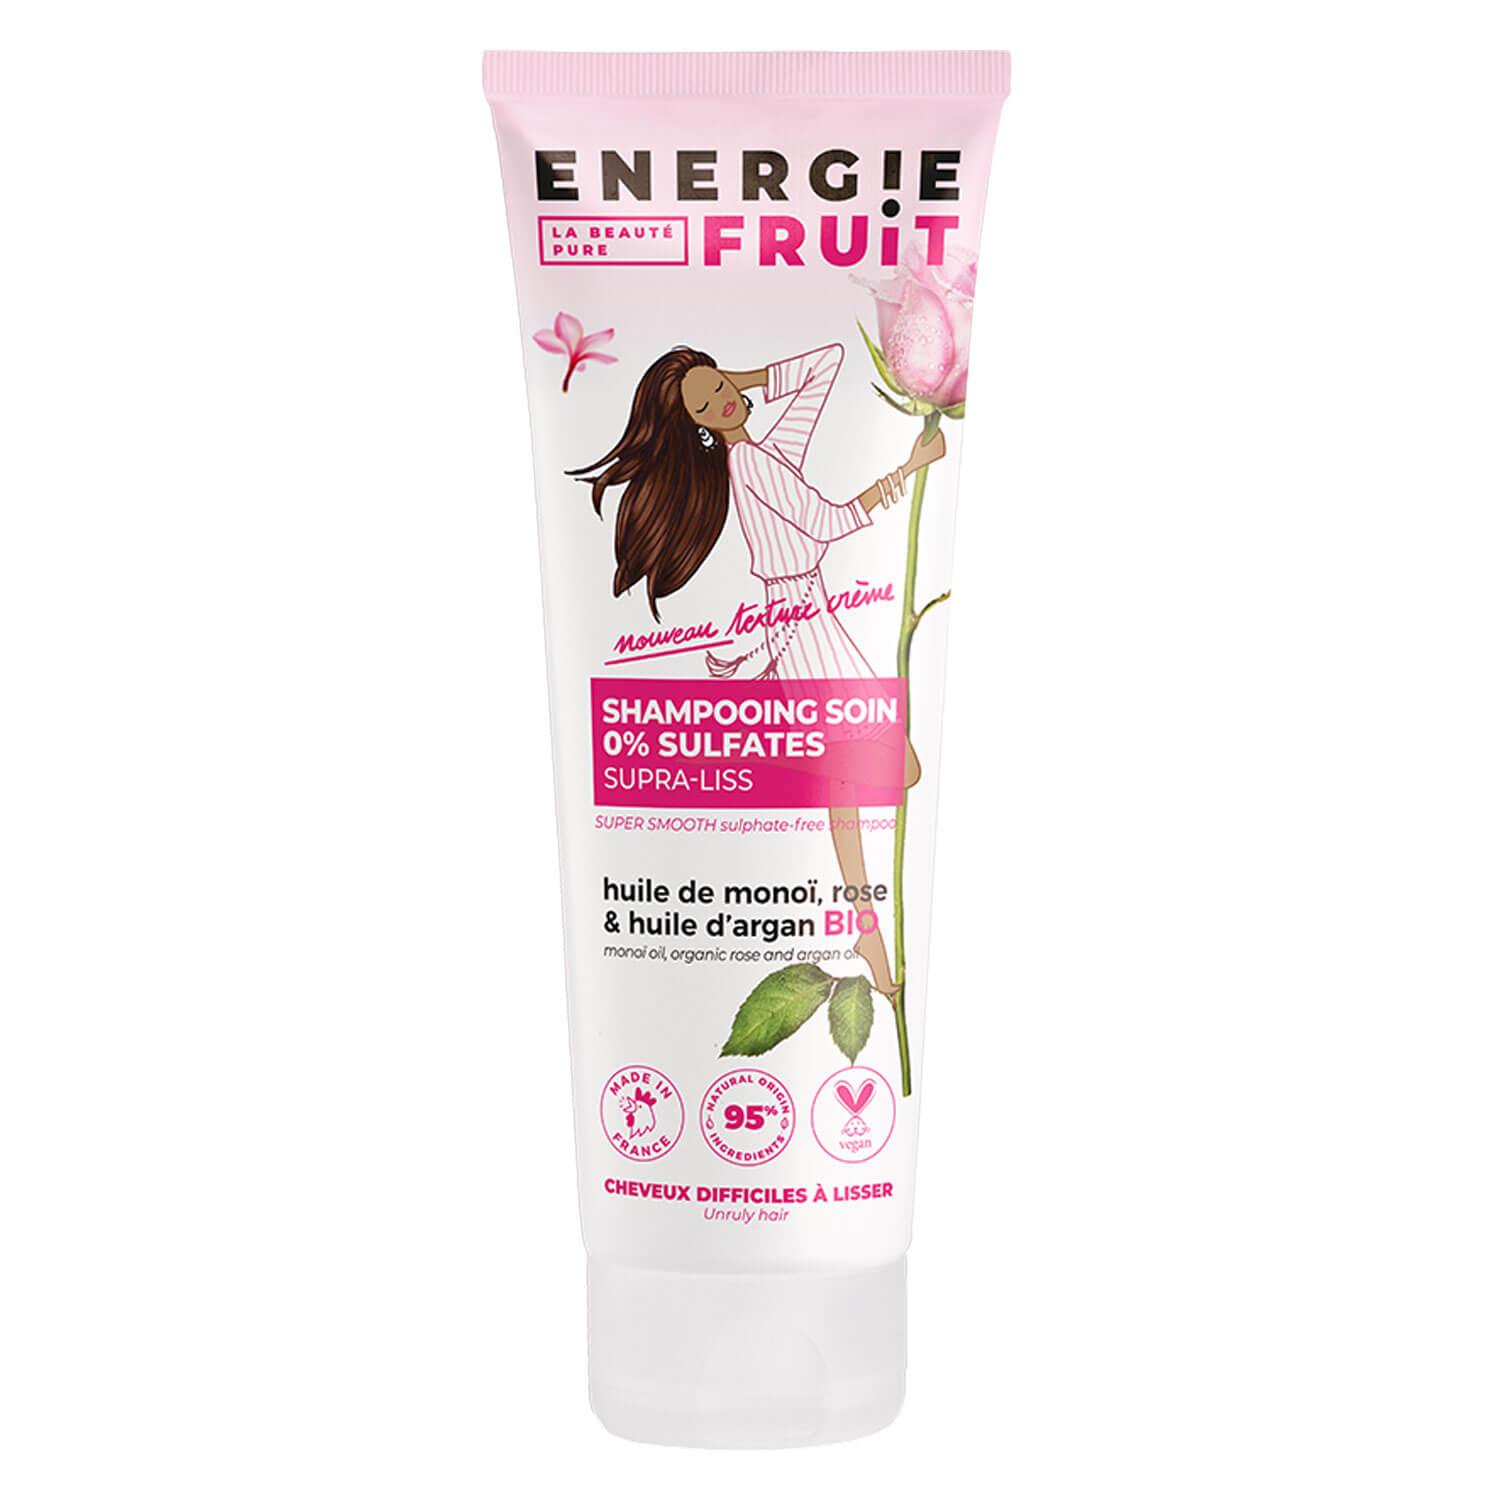 ENERGIE FRUIT - Shampooing Soin 0% Sulfates Supra-Liss